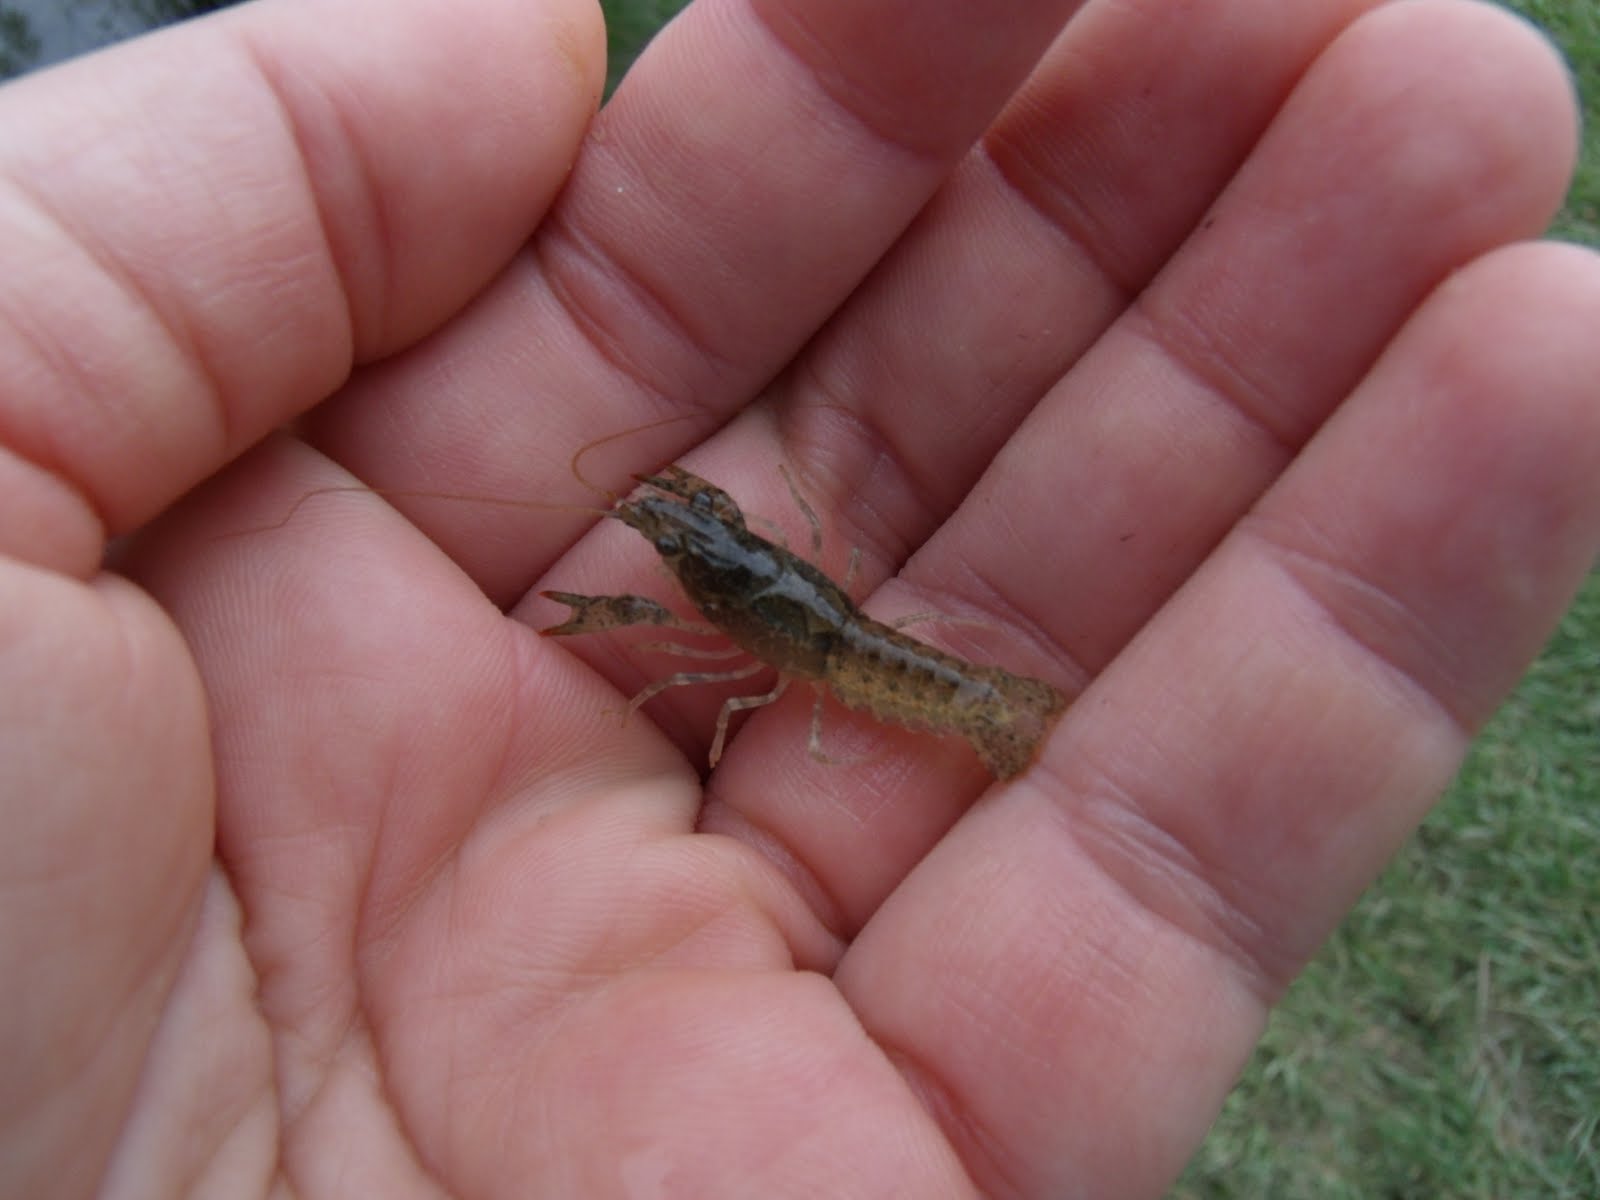 What do baby crickets look like?